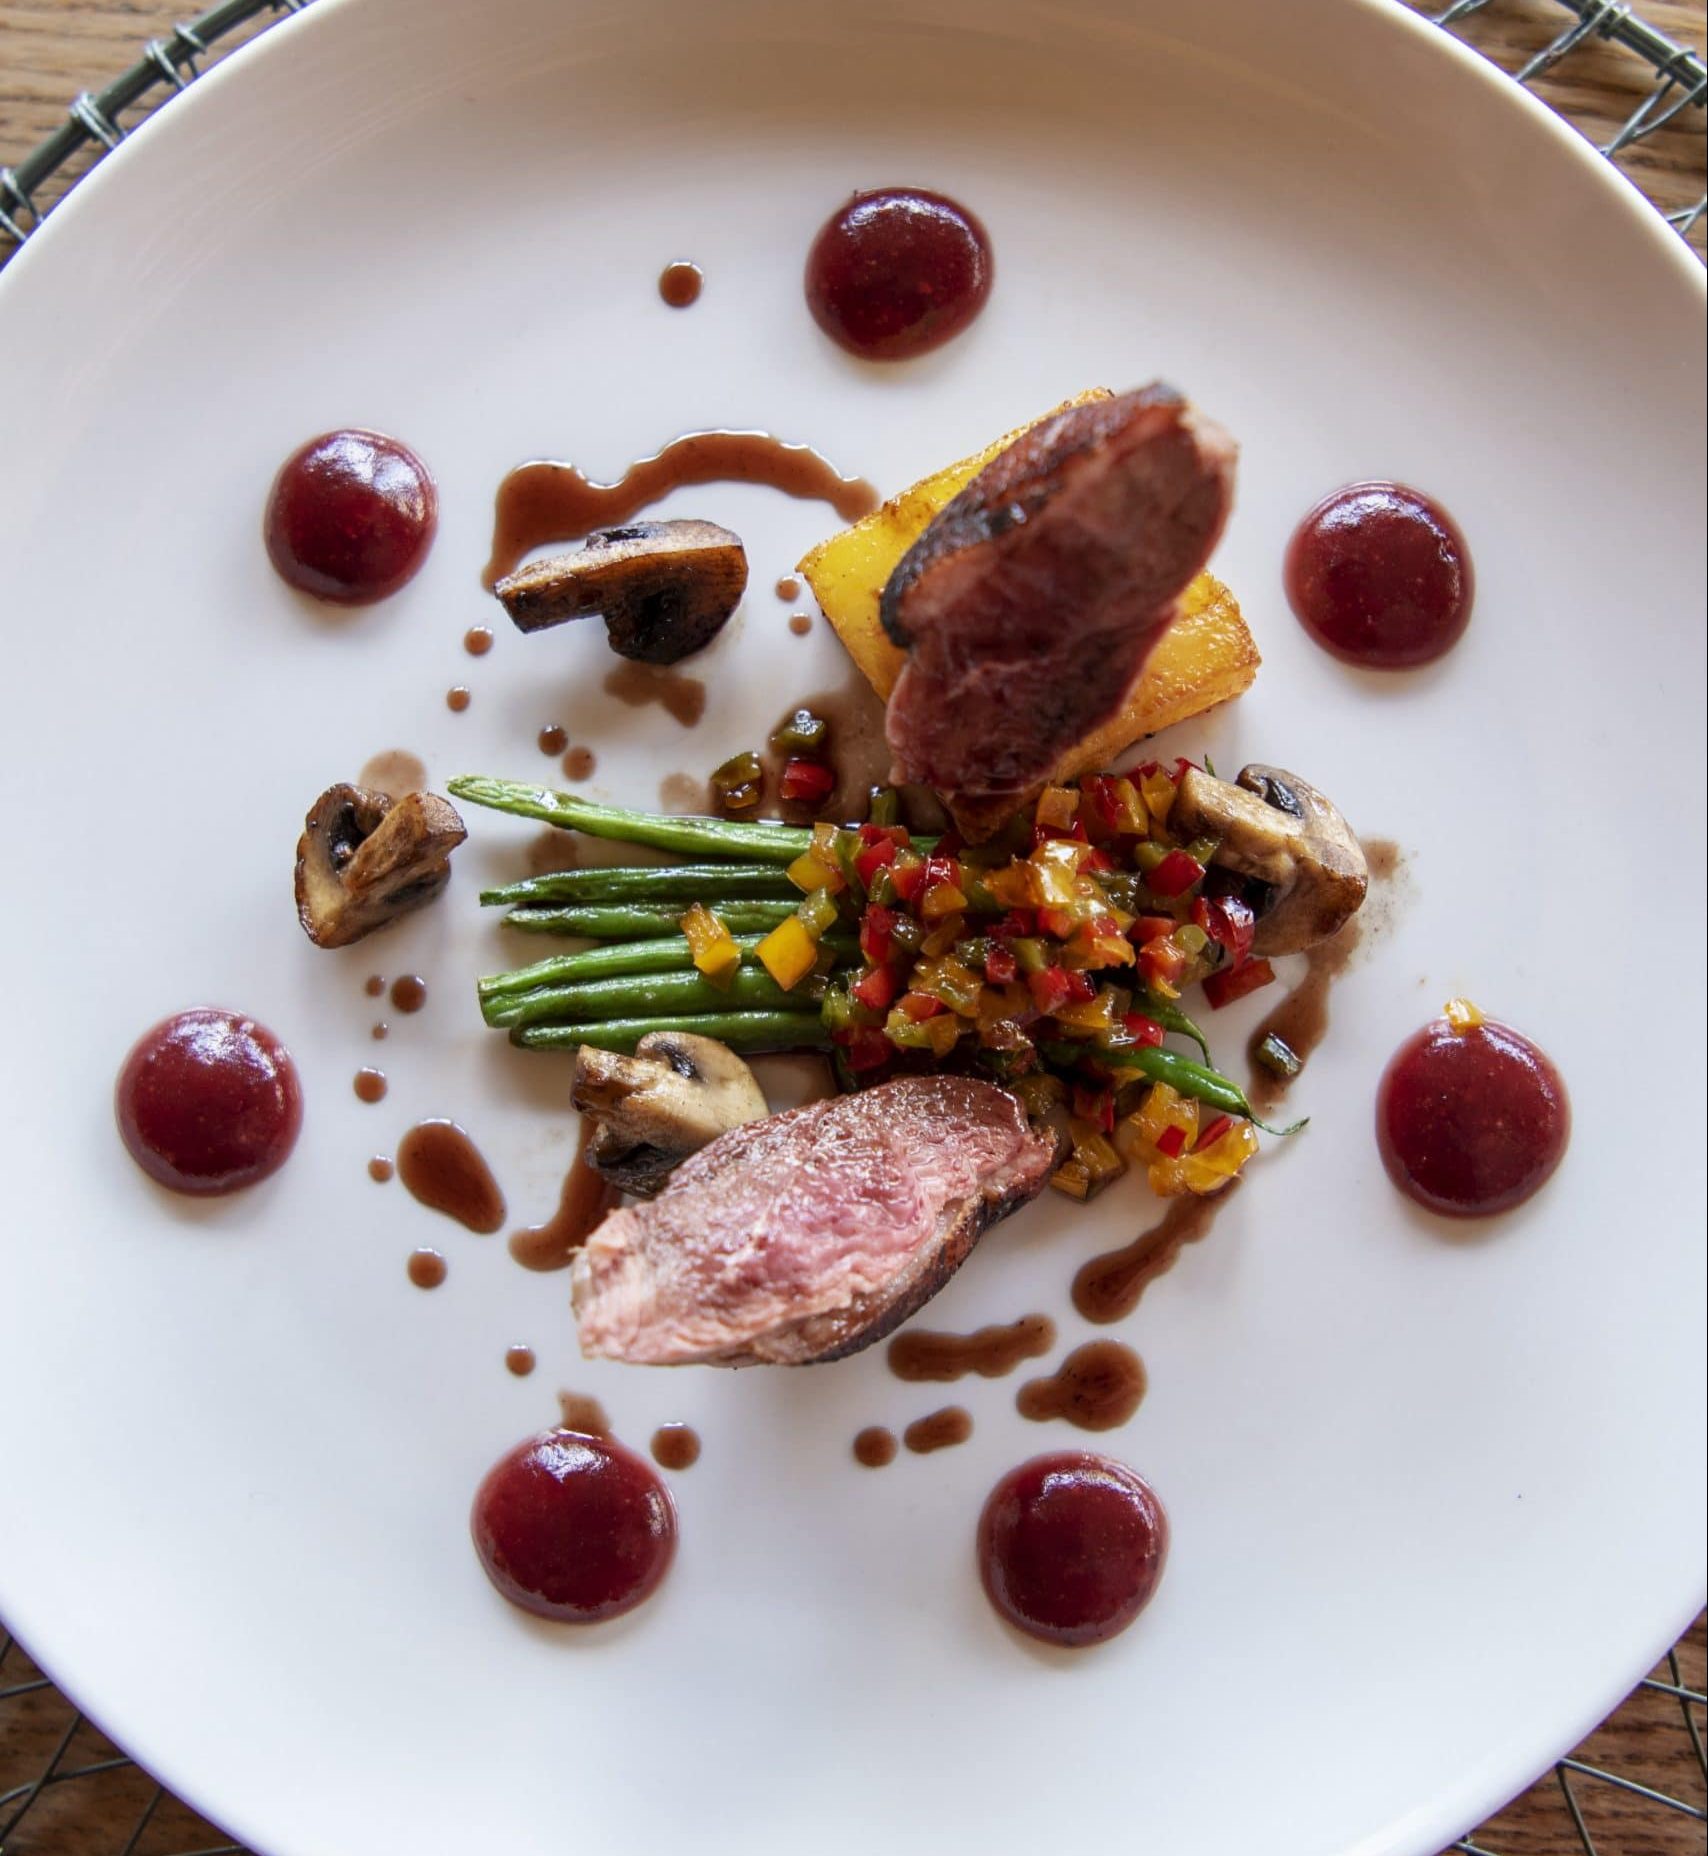 Jabulani-Dining-Pan Fried duck Breast, with potato fondant, cranberry jelly, ratatouille vegetables, young spinach, baby gem squash and rosemary jus - Alex 2